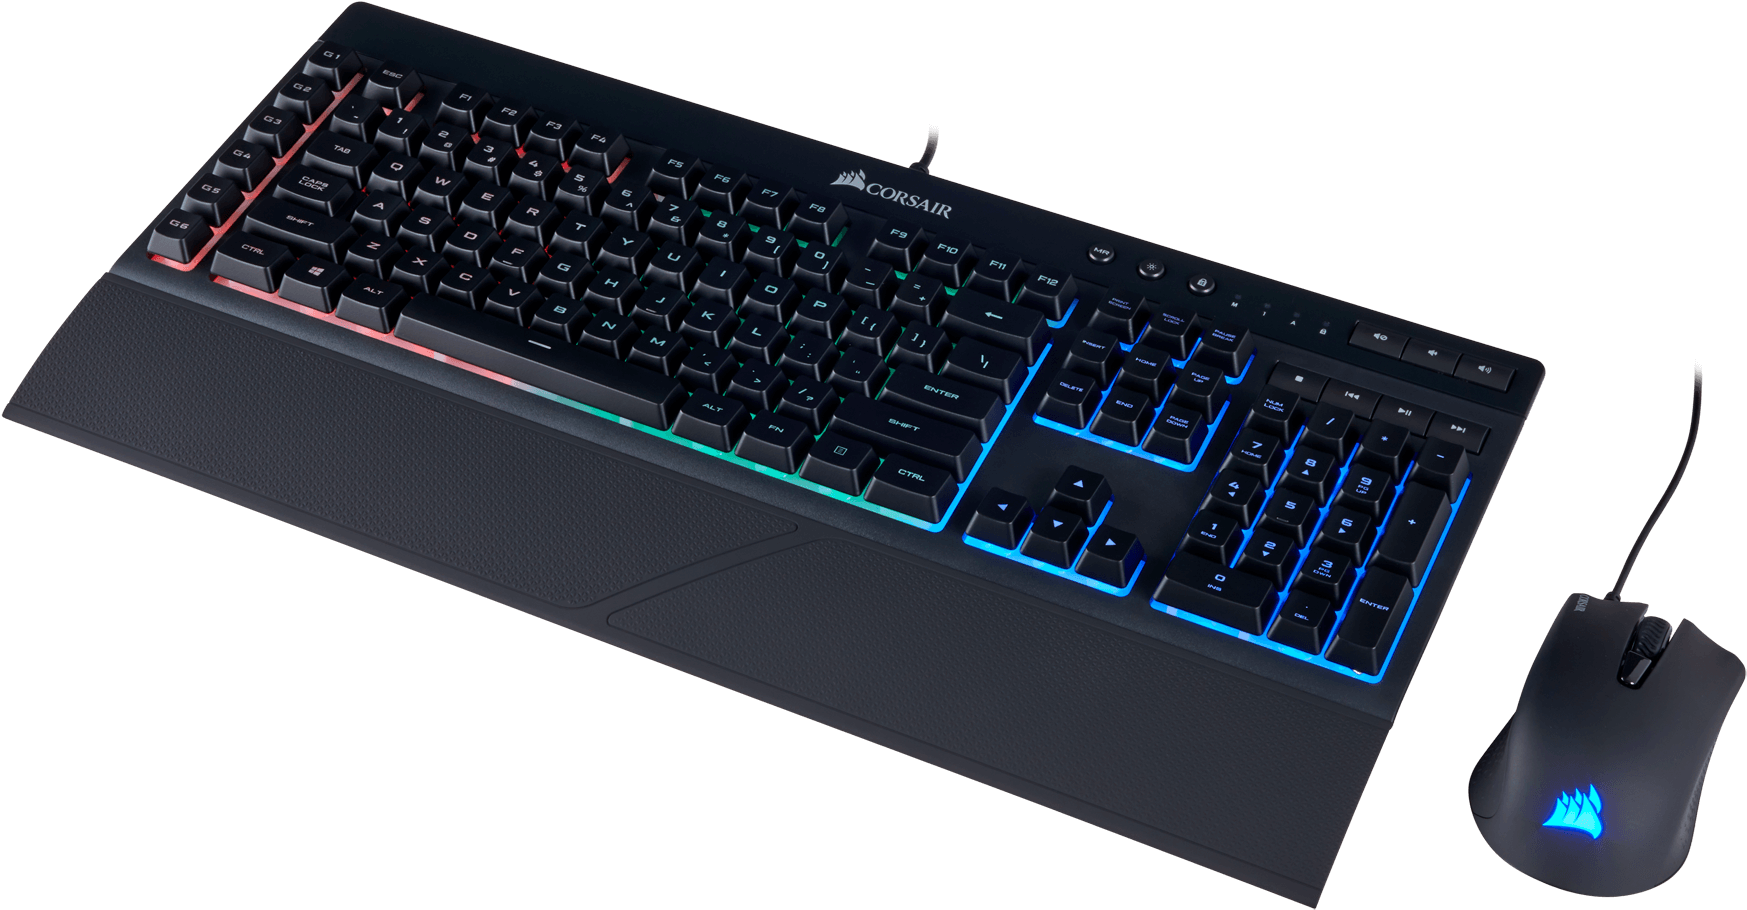 Light Keyboard And Mouse PNG Transparent Image